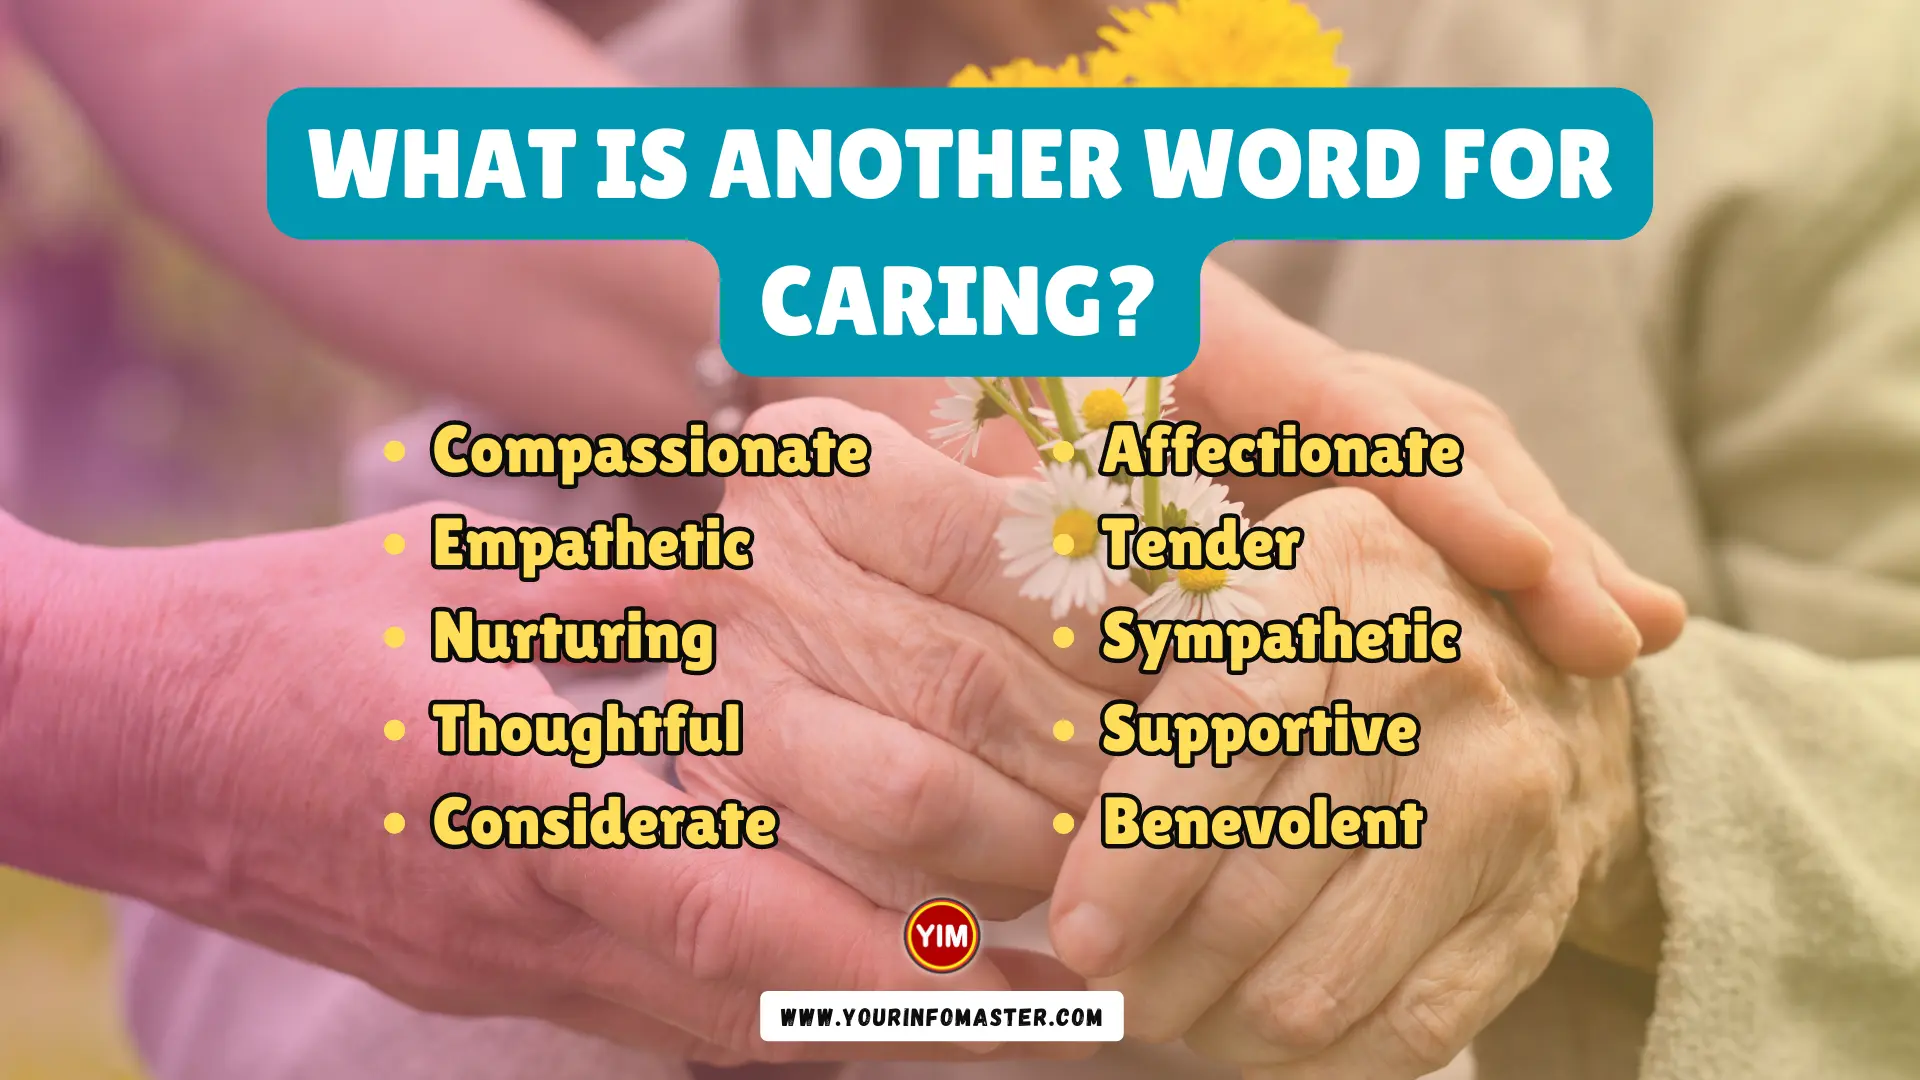 what-is-another-word-for-caring-caring-synonyms-antonyms-and